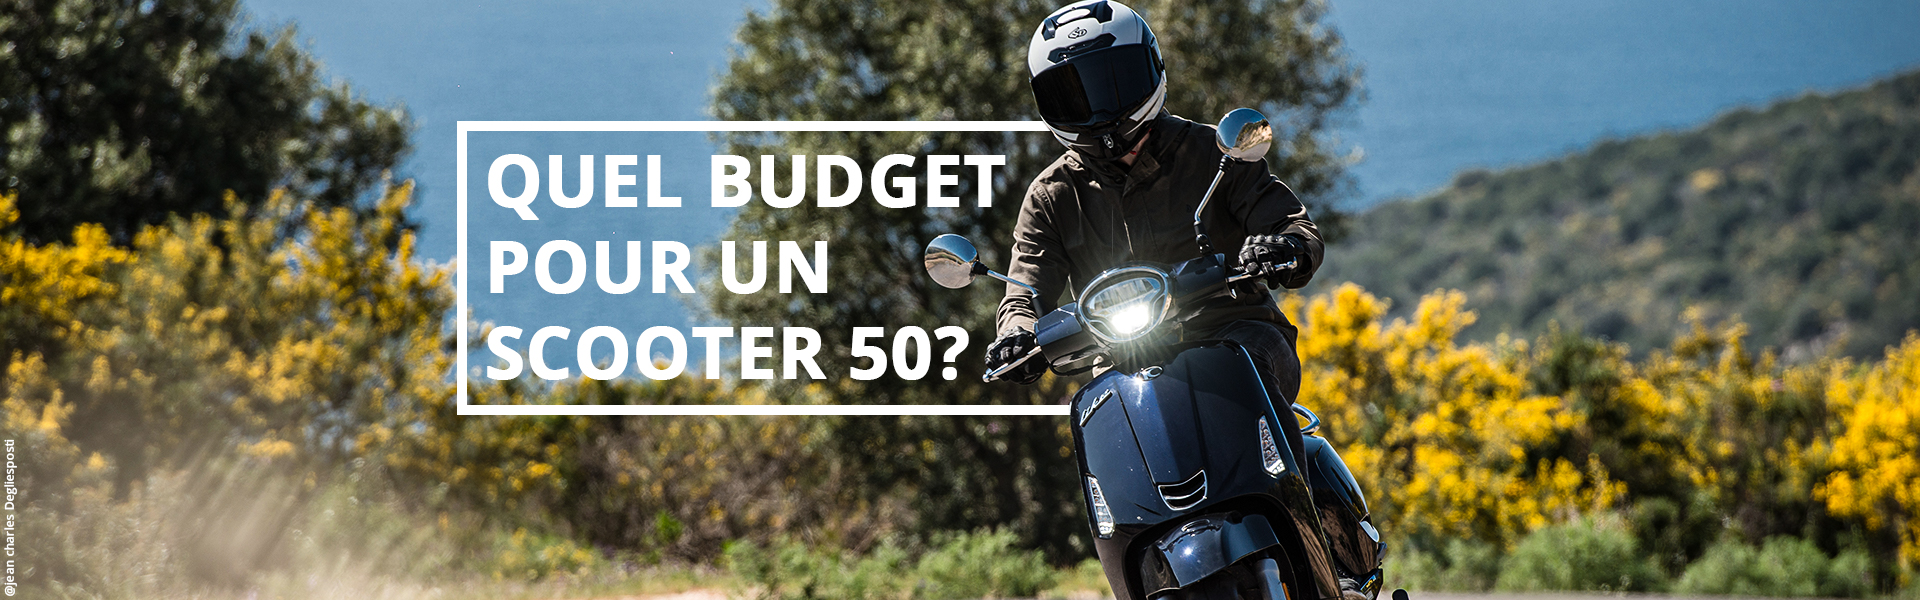 budget-achat-scooter50cc